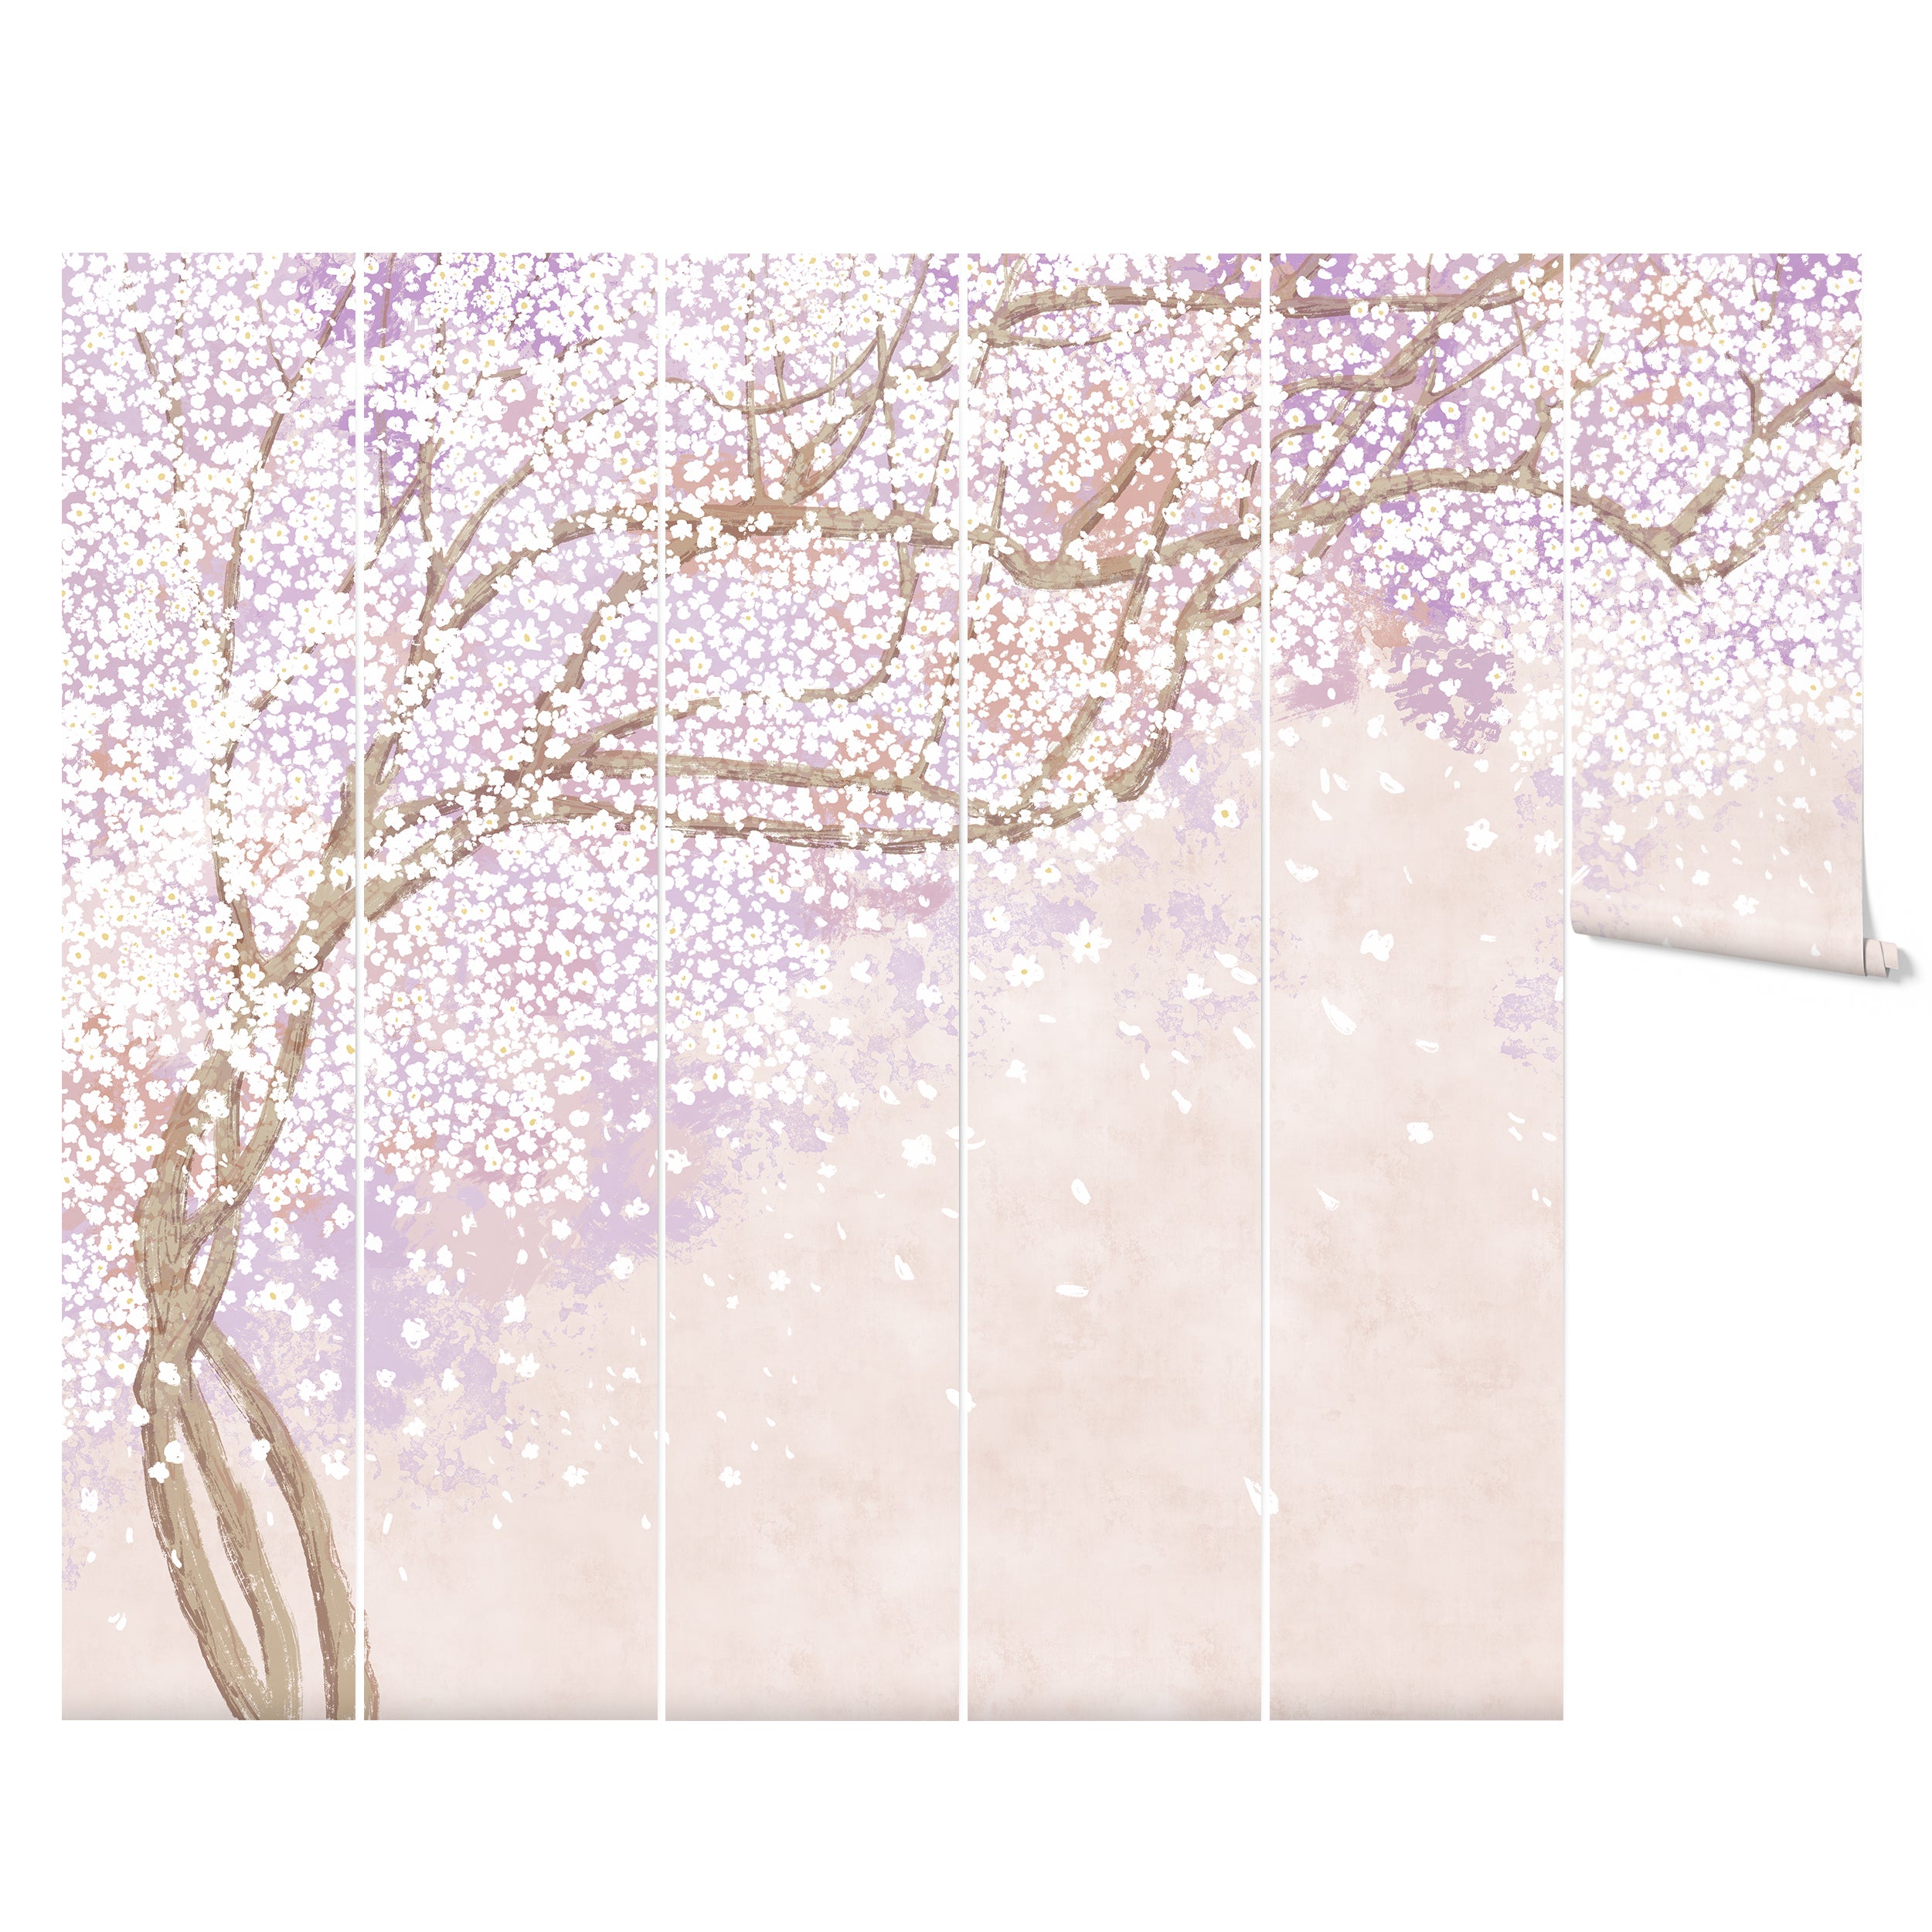 Mockup of the Sakura Nursery Kid Wallpaper Mural in six panels, depicting the full cherry blossom tree design with branches and flowers extending across the pastel pink panels, perfect for creating a dreamy and peaceful nursery environment.